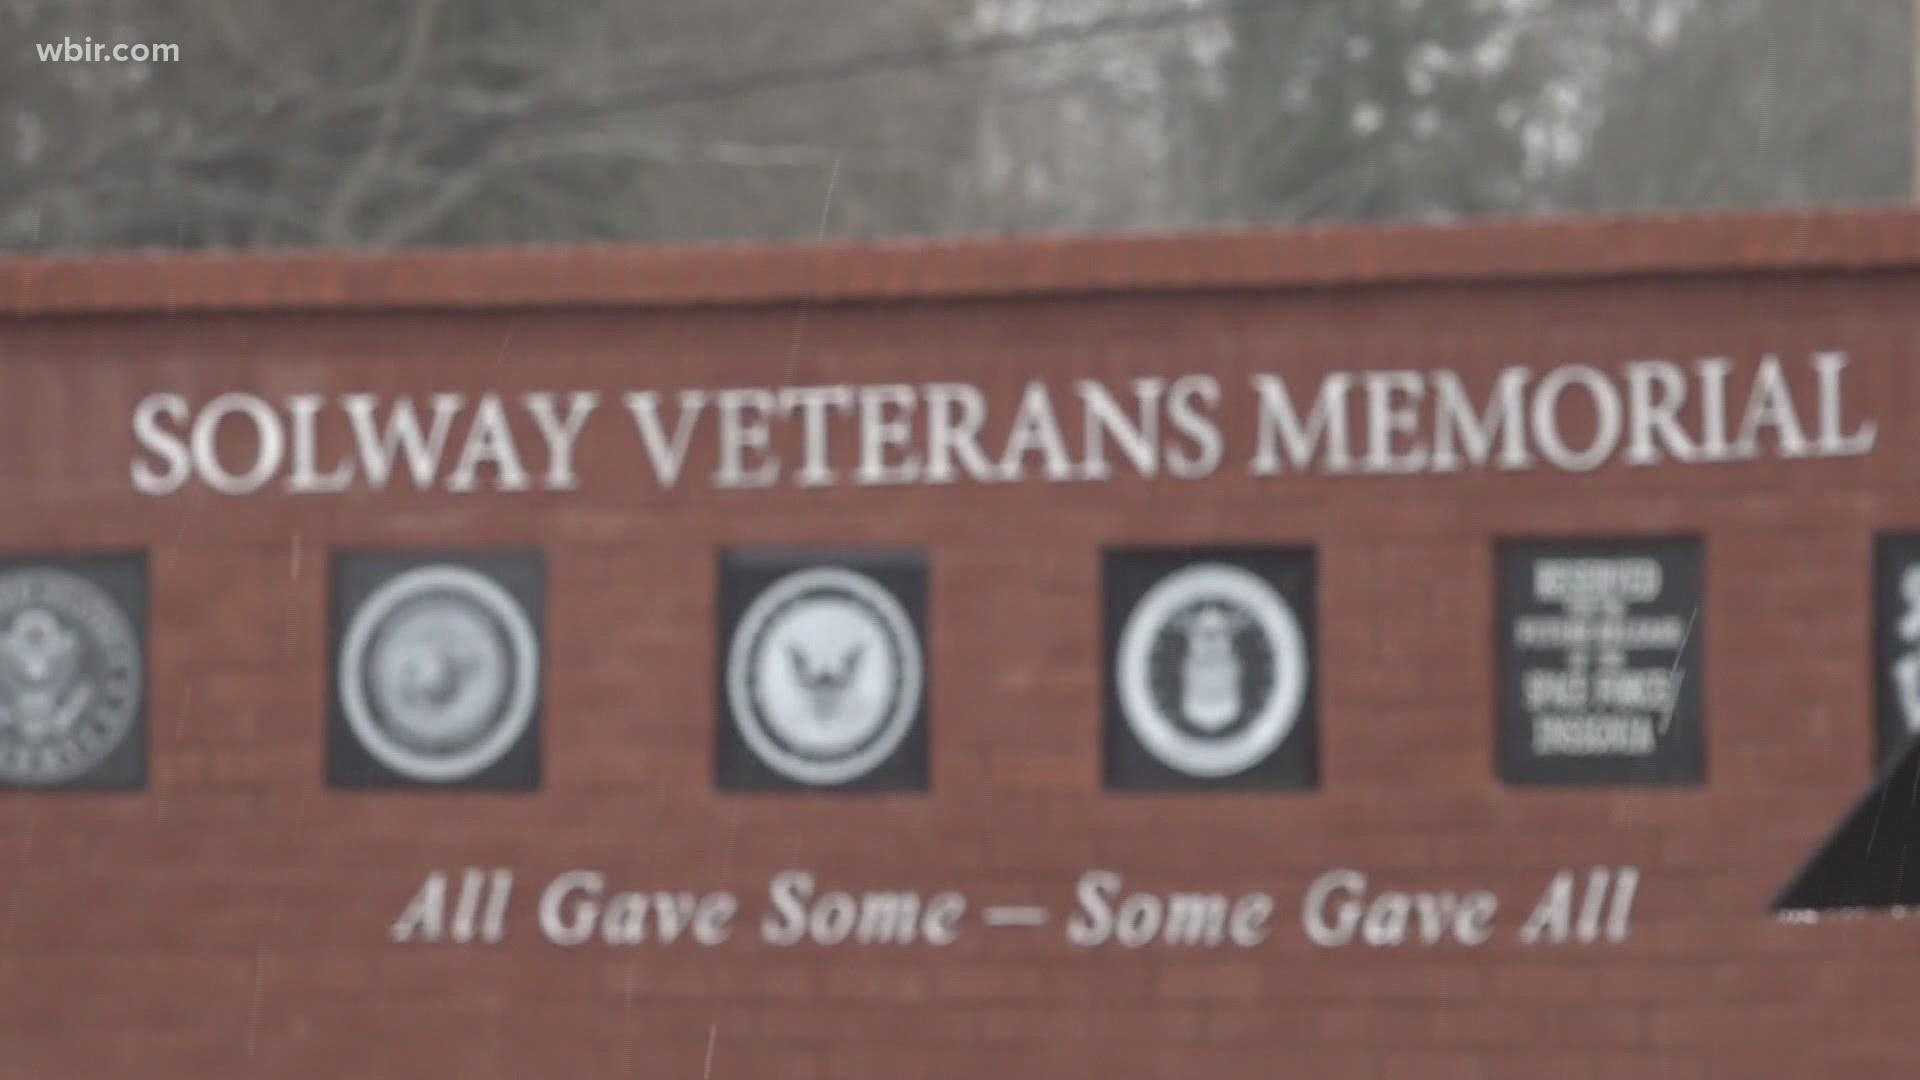 The Solway Veterans Memorial is located at 9014 Solway Ferry Rd., Knoxville. It's open during daylight hours. Jan. 11, 2021-4pm.